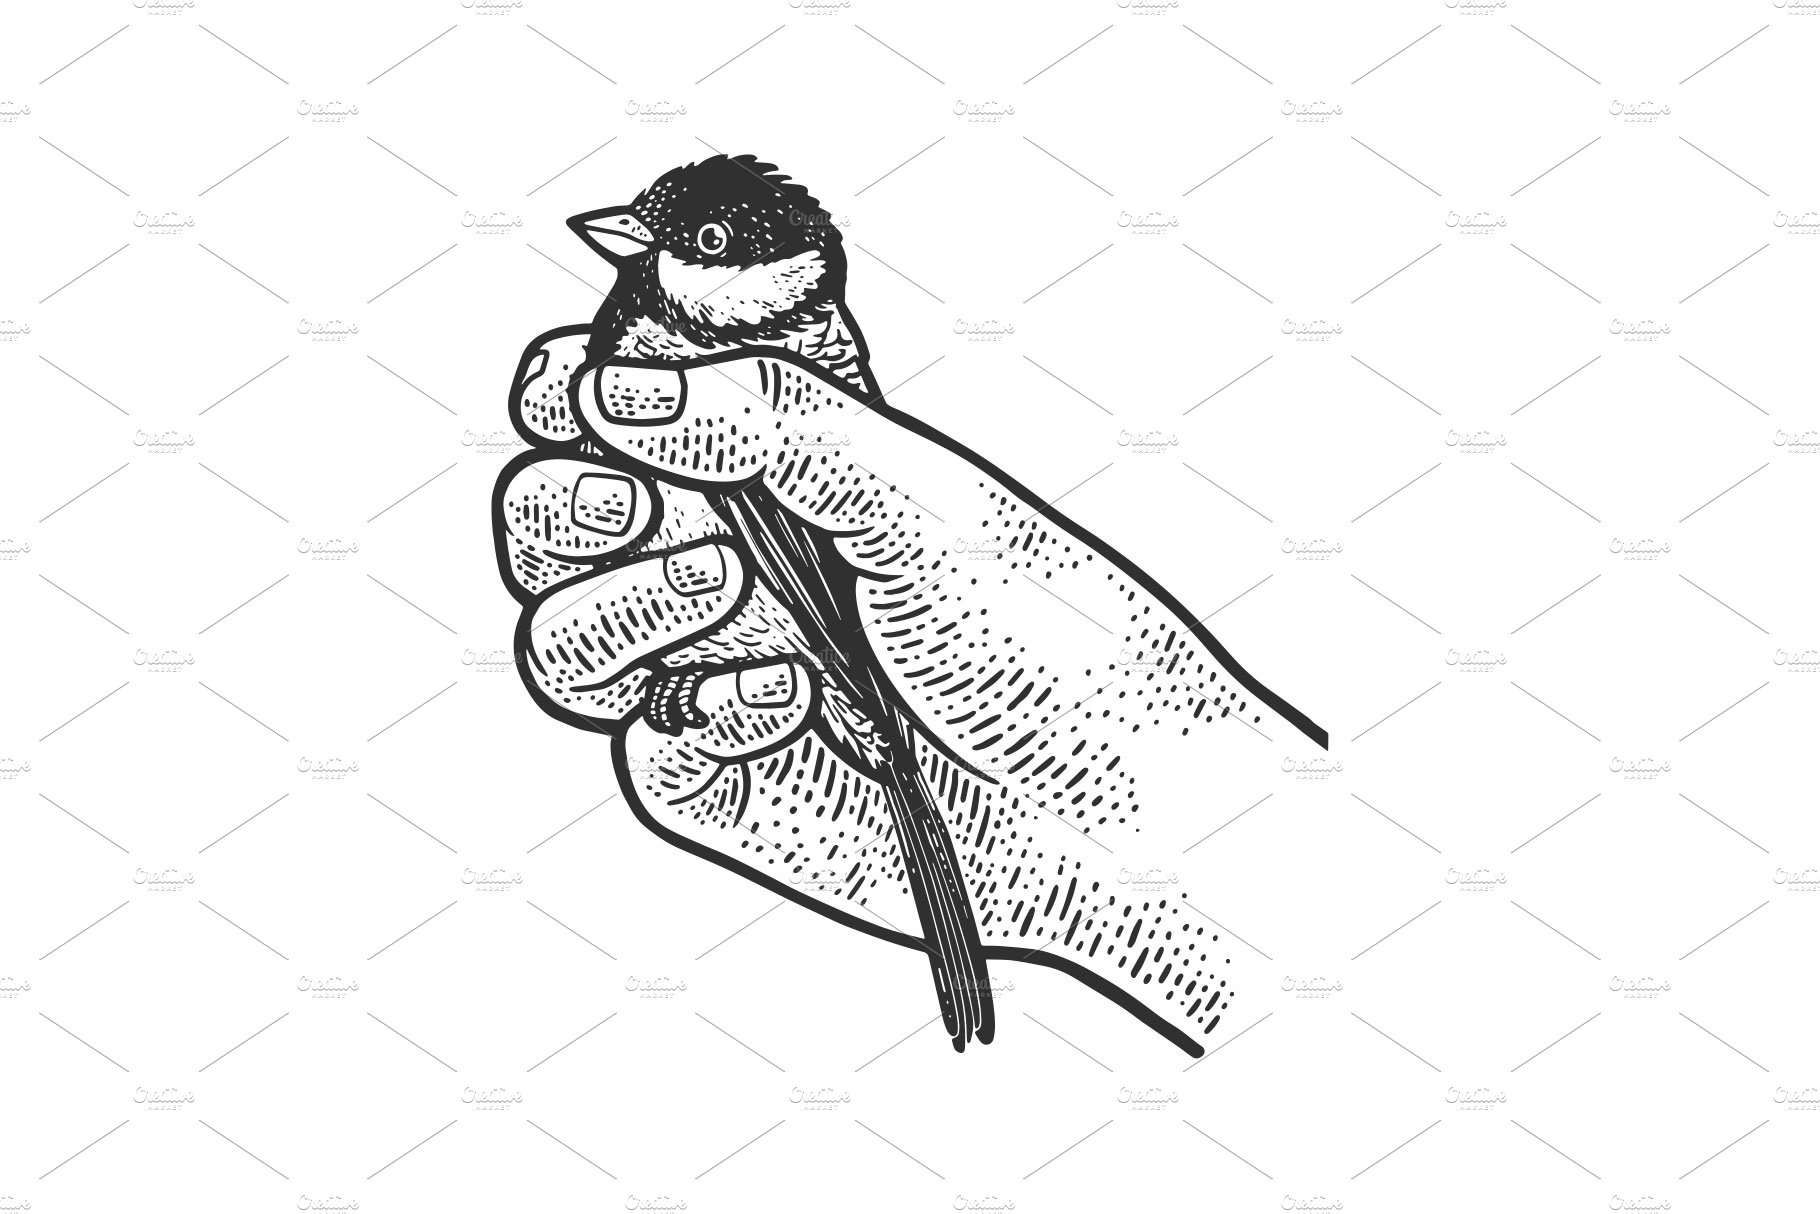 tit bird in hand sketch vector cover image.